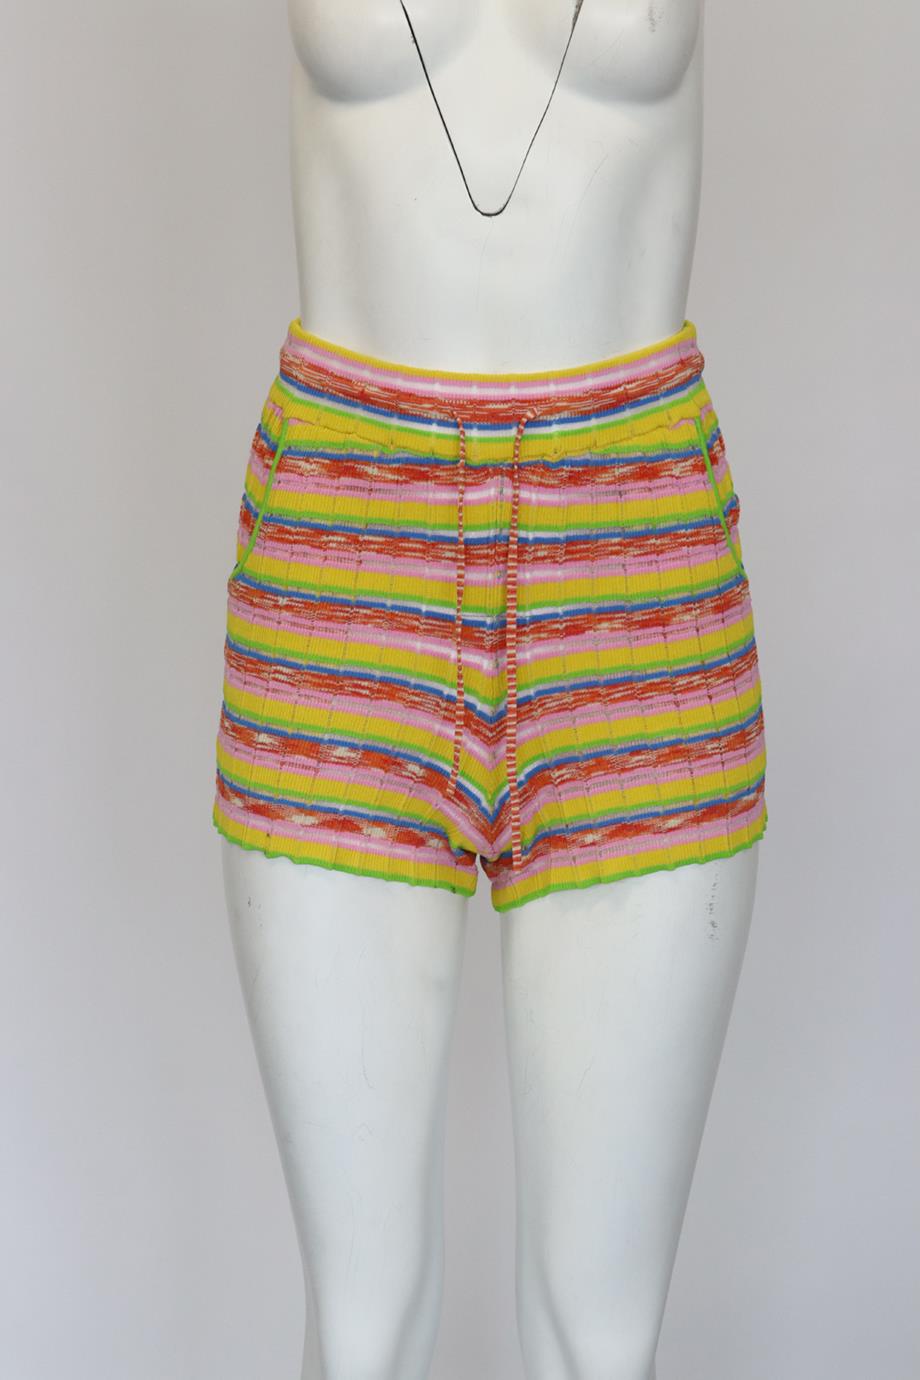 SOLID AND STRIPED STRIPED KNIT SHORTS XSMALL